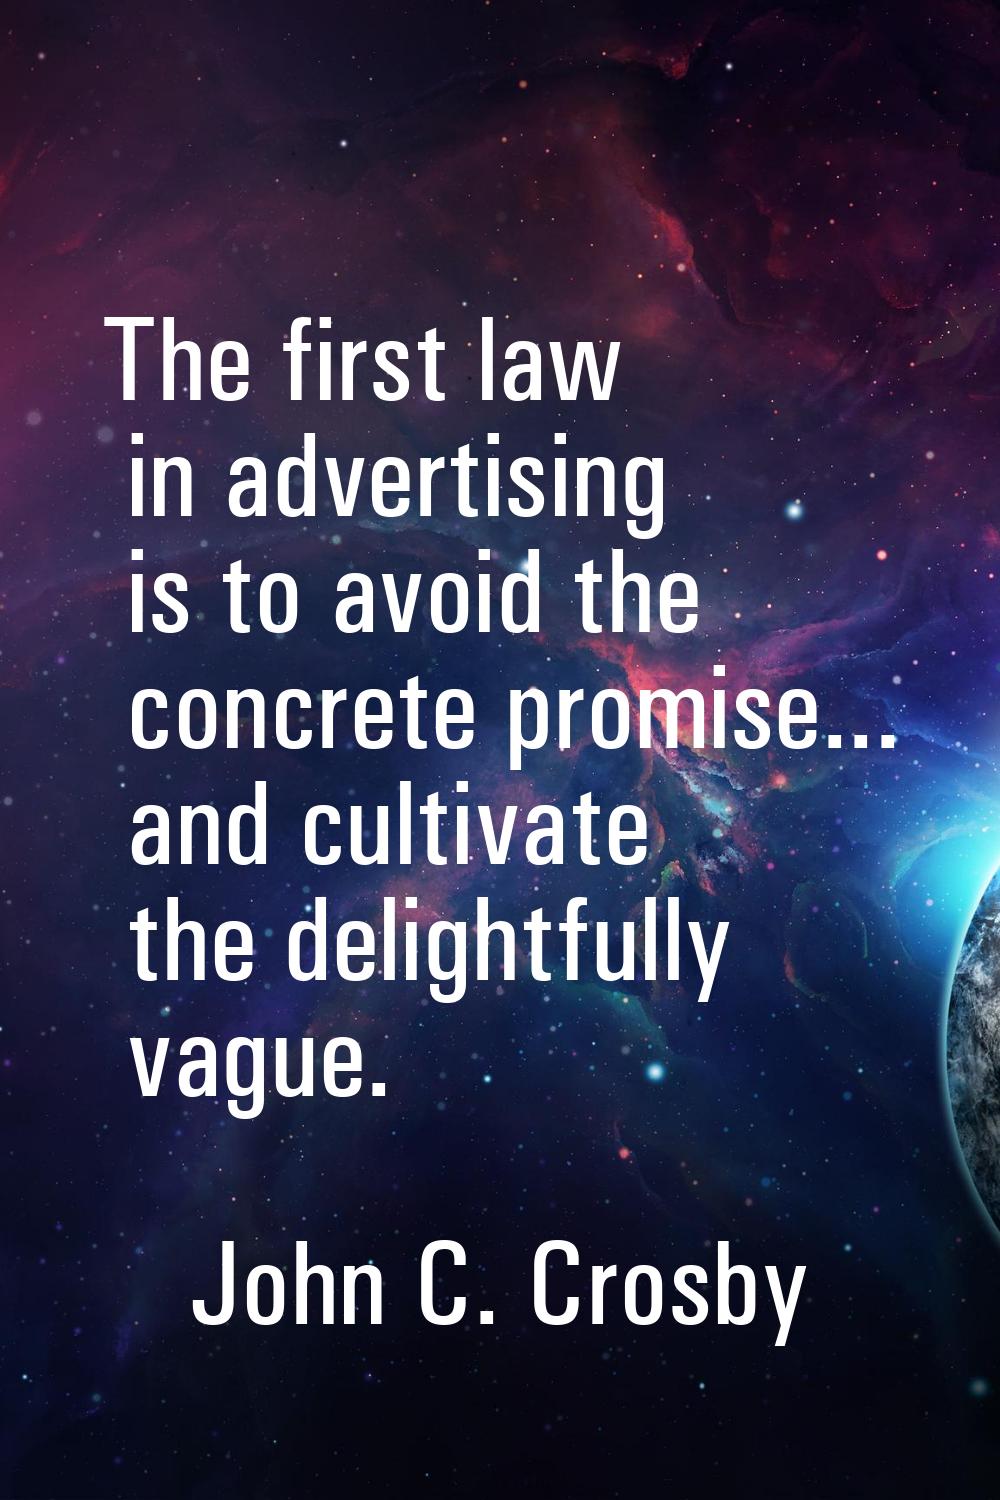 The first law in advertising is to avoid the concrete promise... and cultivate the delightfully vag